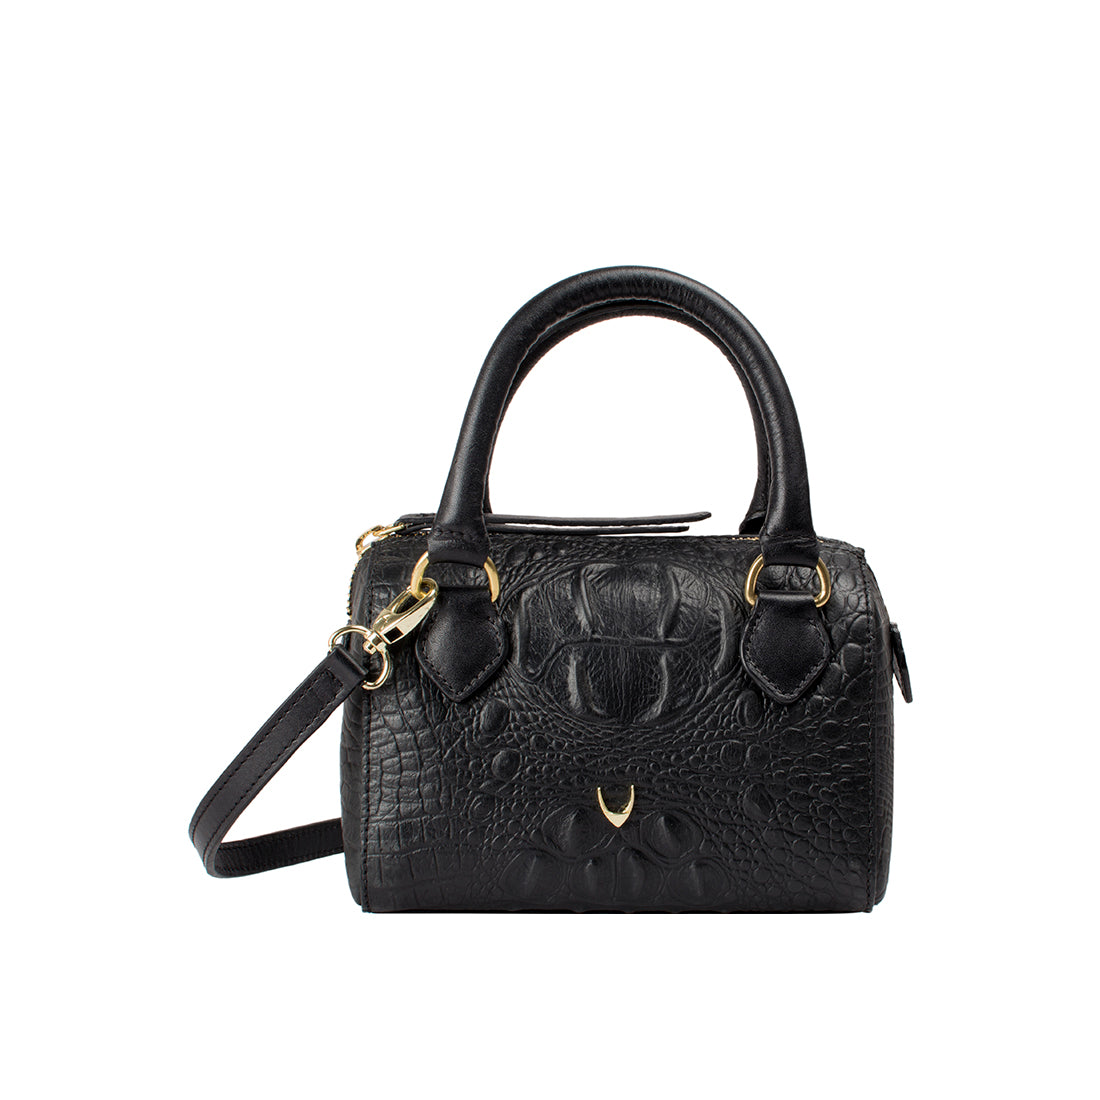 Leather Bag - Buy Leather Bags Online at Best Price in India